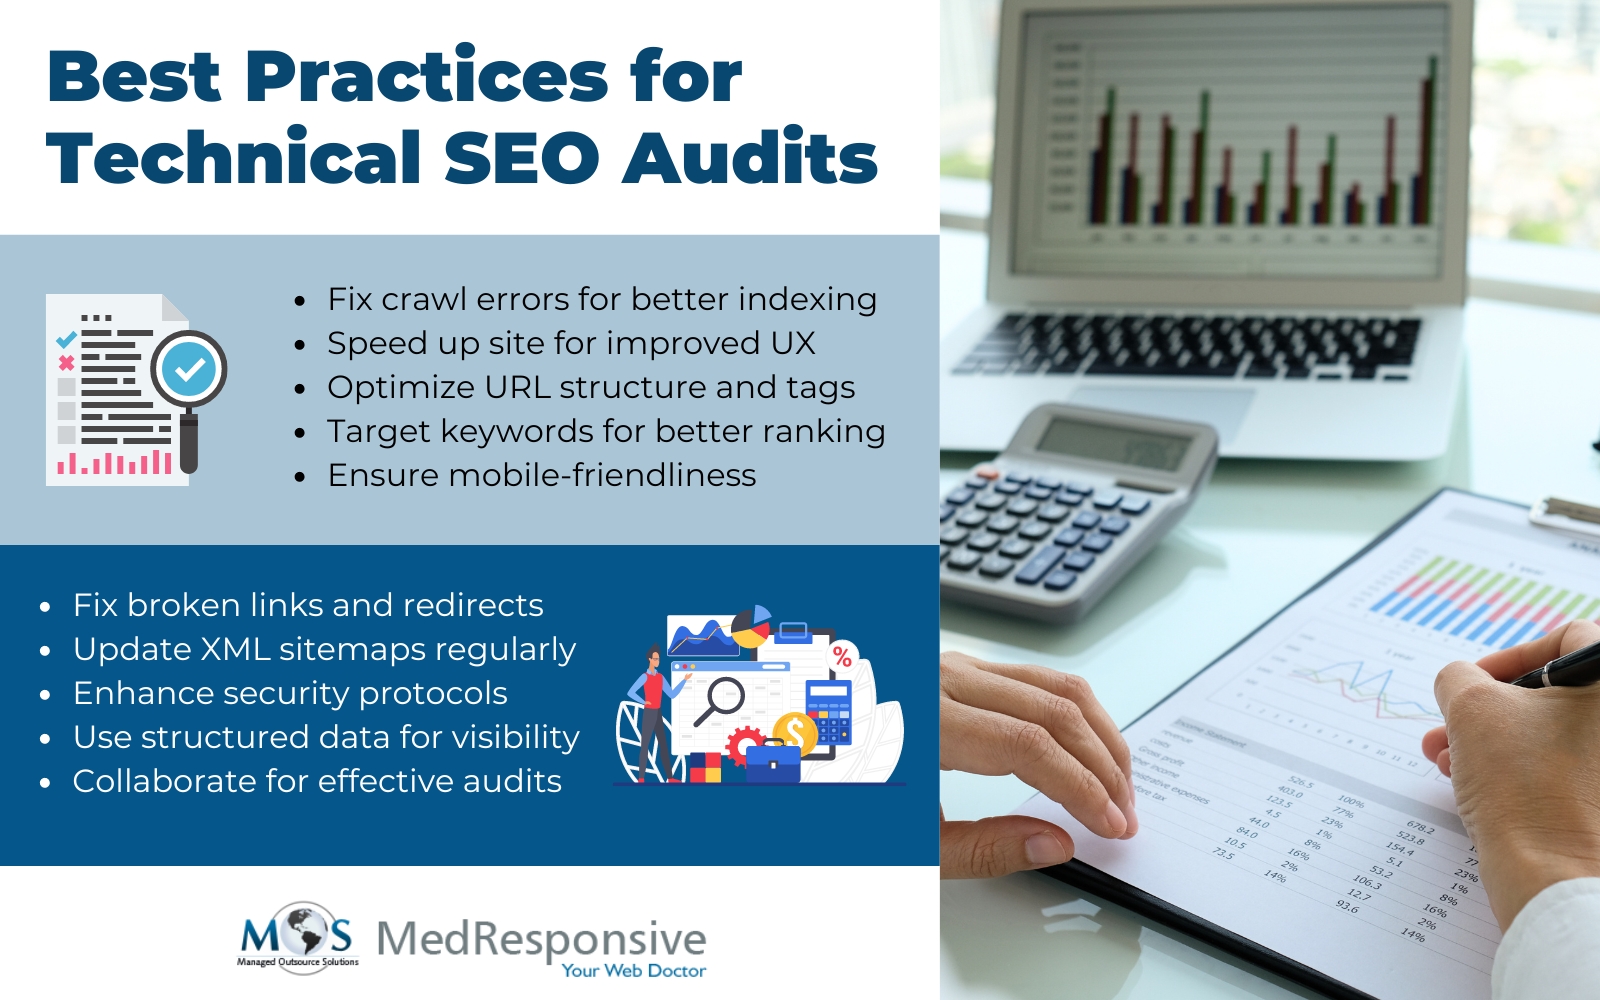 Best Practices for Technical SEO Audits